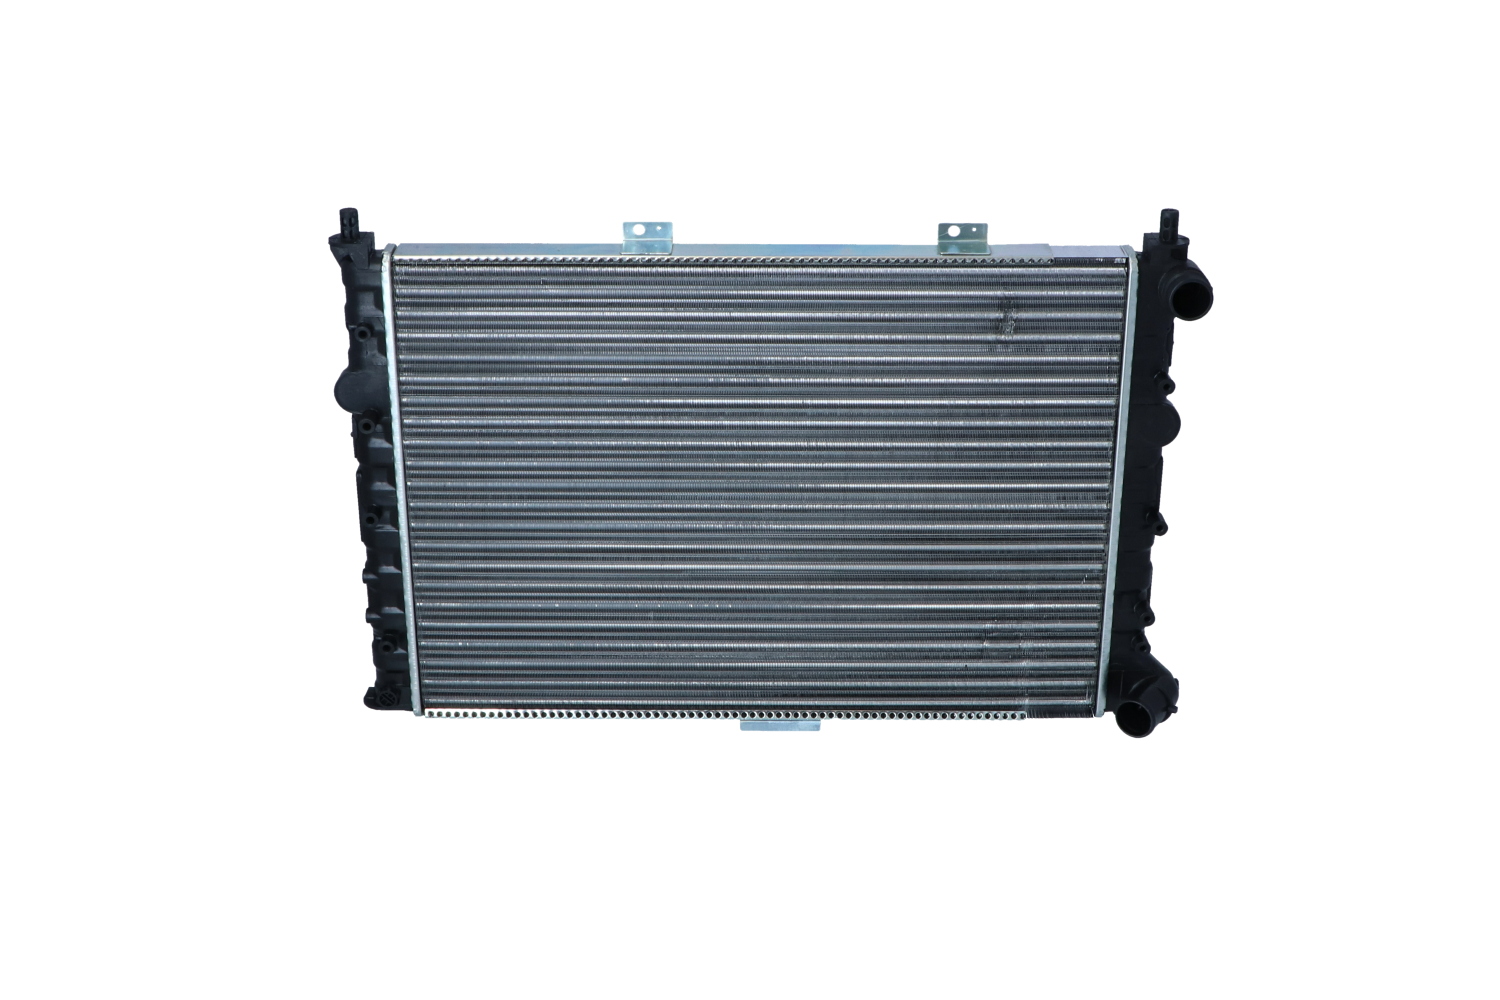 NRF 58216 Engine radiator Aluminium, 580 x 415 x 34 mm, Mechanically jointed cooling fins